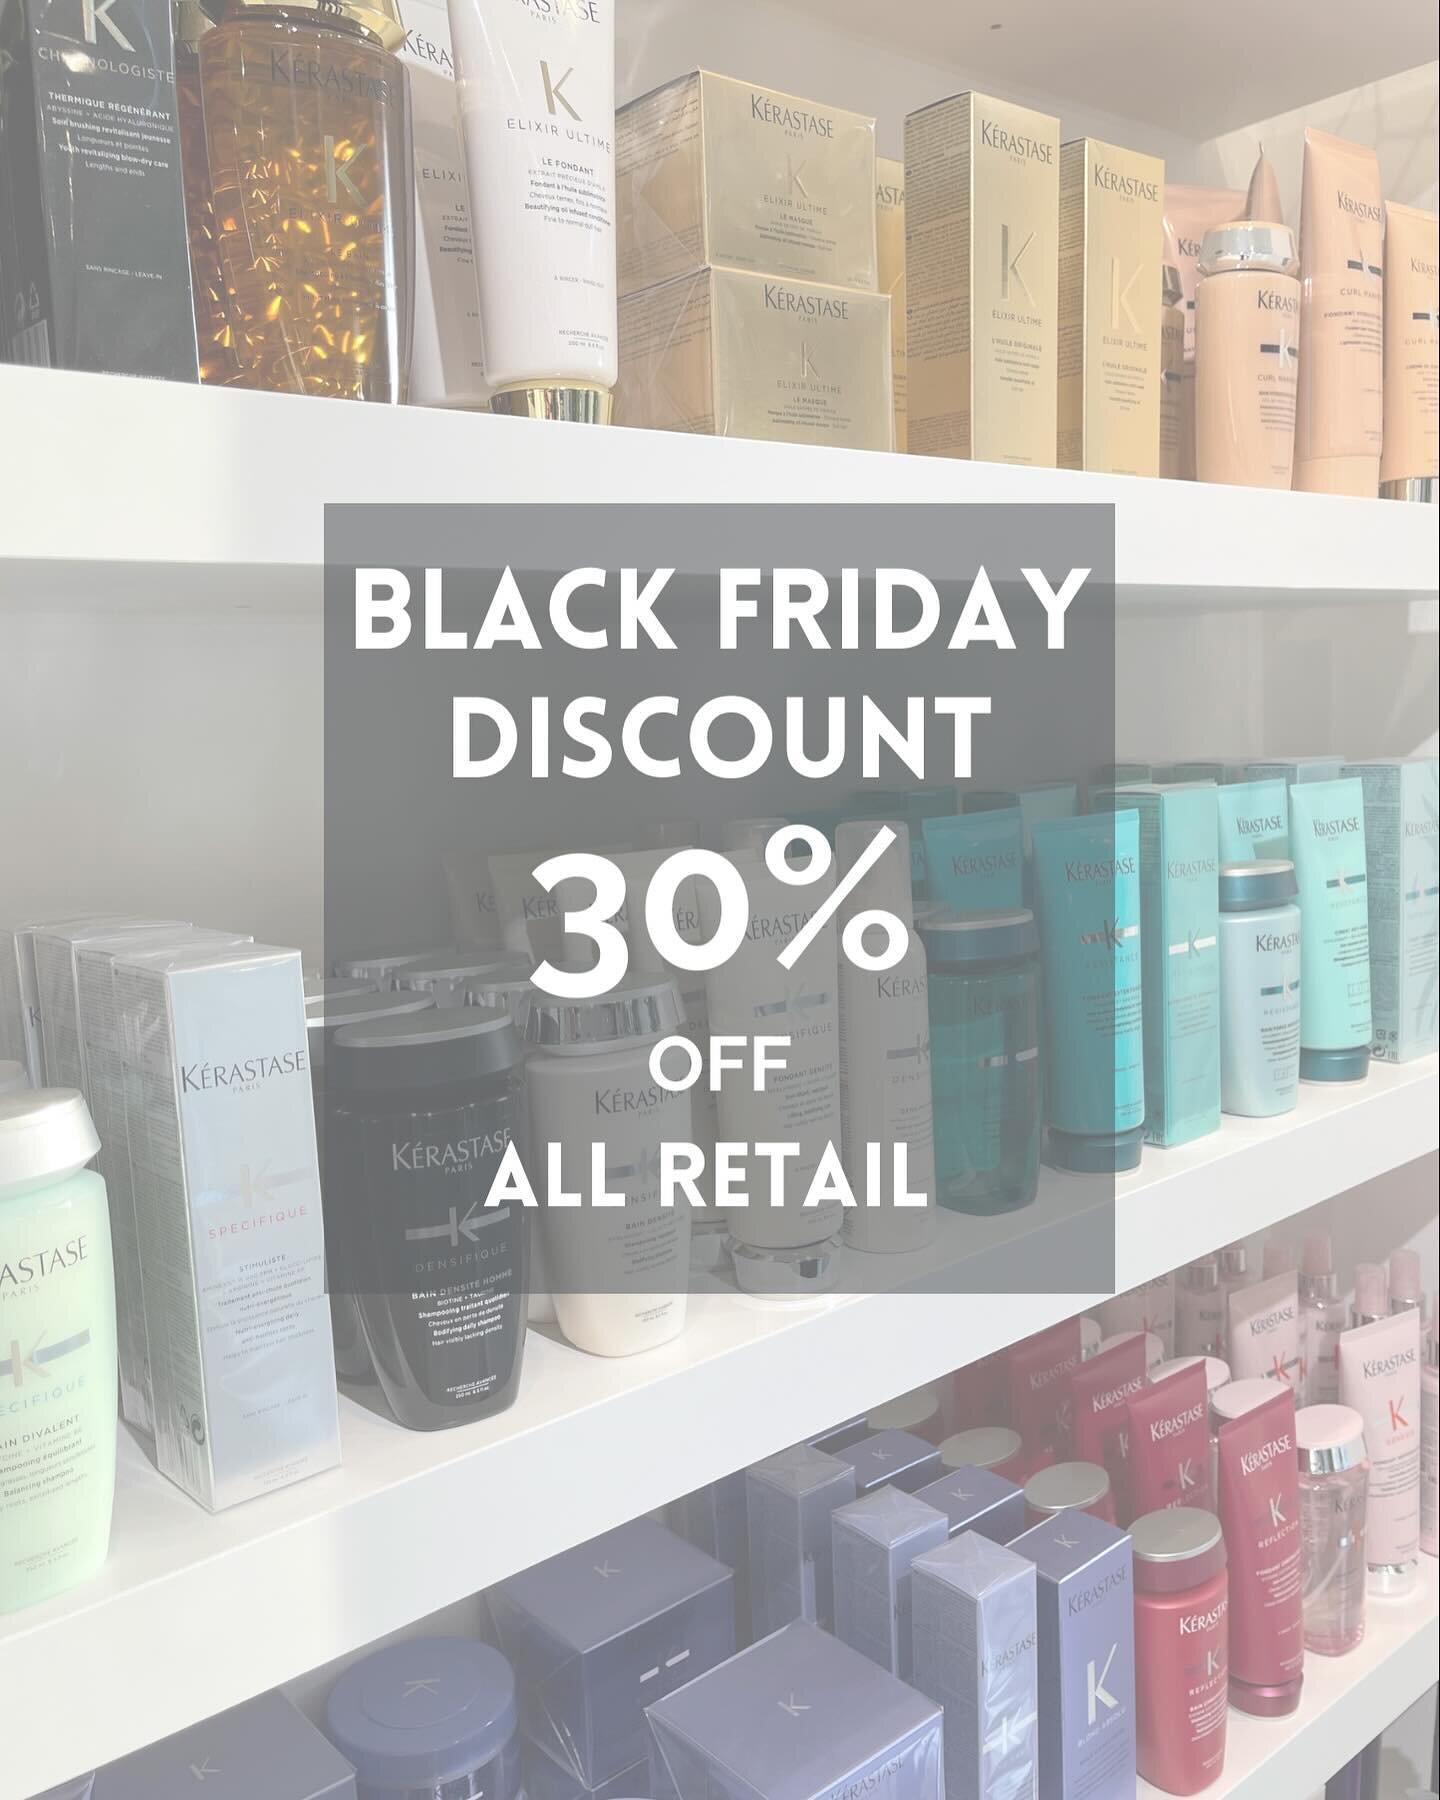 Our BLACK FRIDAY SALE has started early!!

30% off ALL RETAIL

&amp;

BLOW-DRY BUNDLES 
Buy a course of 4 blow-dries, get 2 free. 
Buy a course of 8 blow-dries, get 4 free. 

Blow-dry bundles can be purchased in store or online, and will be added to 